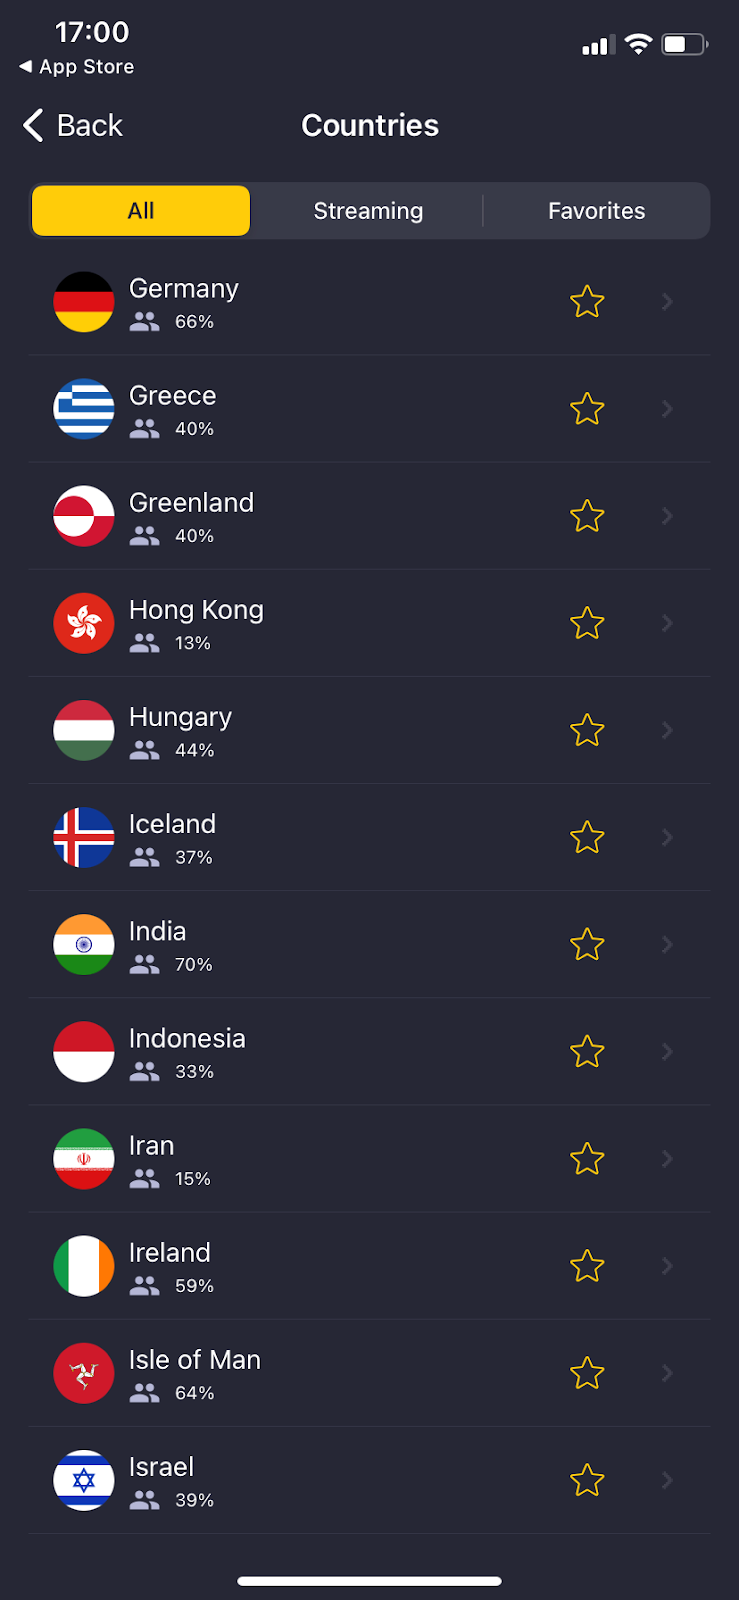 CyberGhost VPN's country list as seen on an iPhone